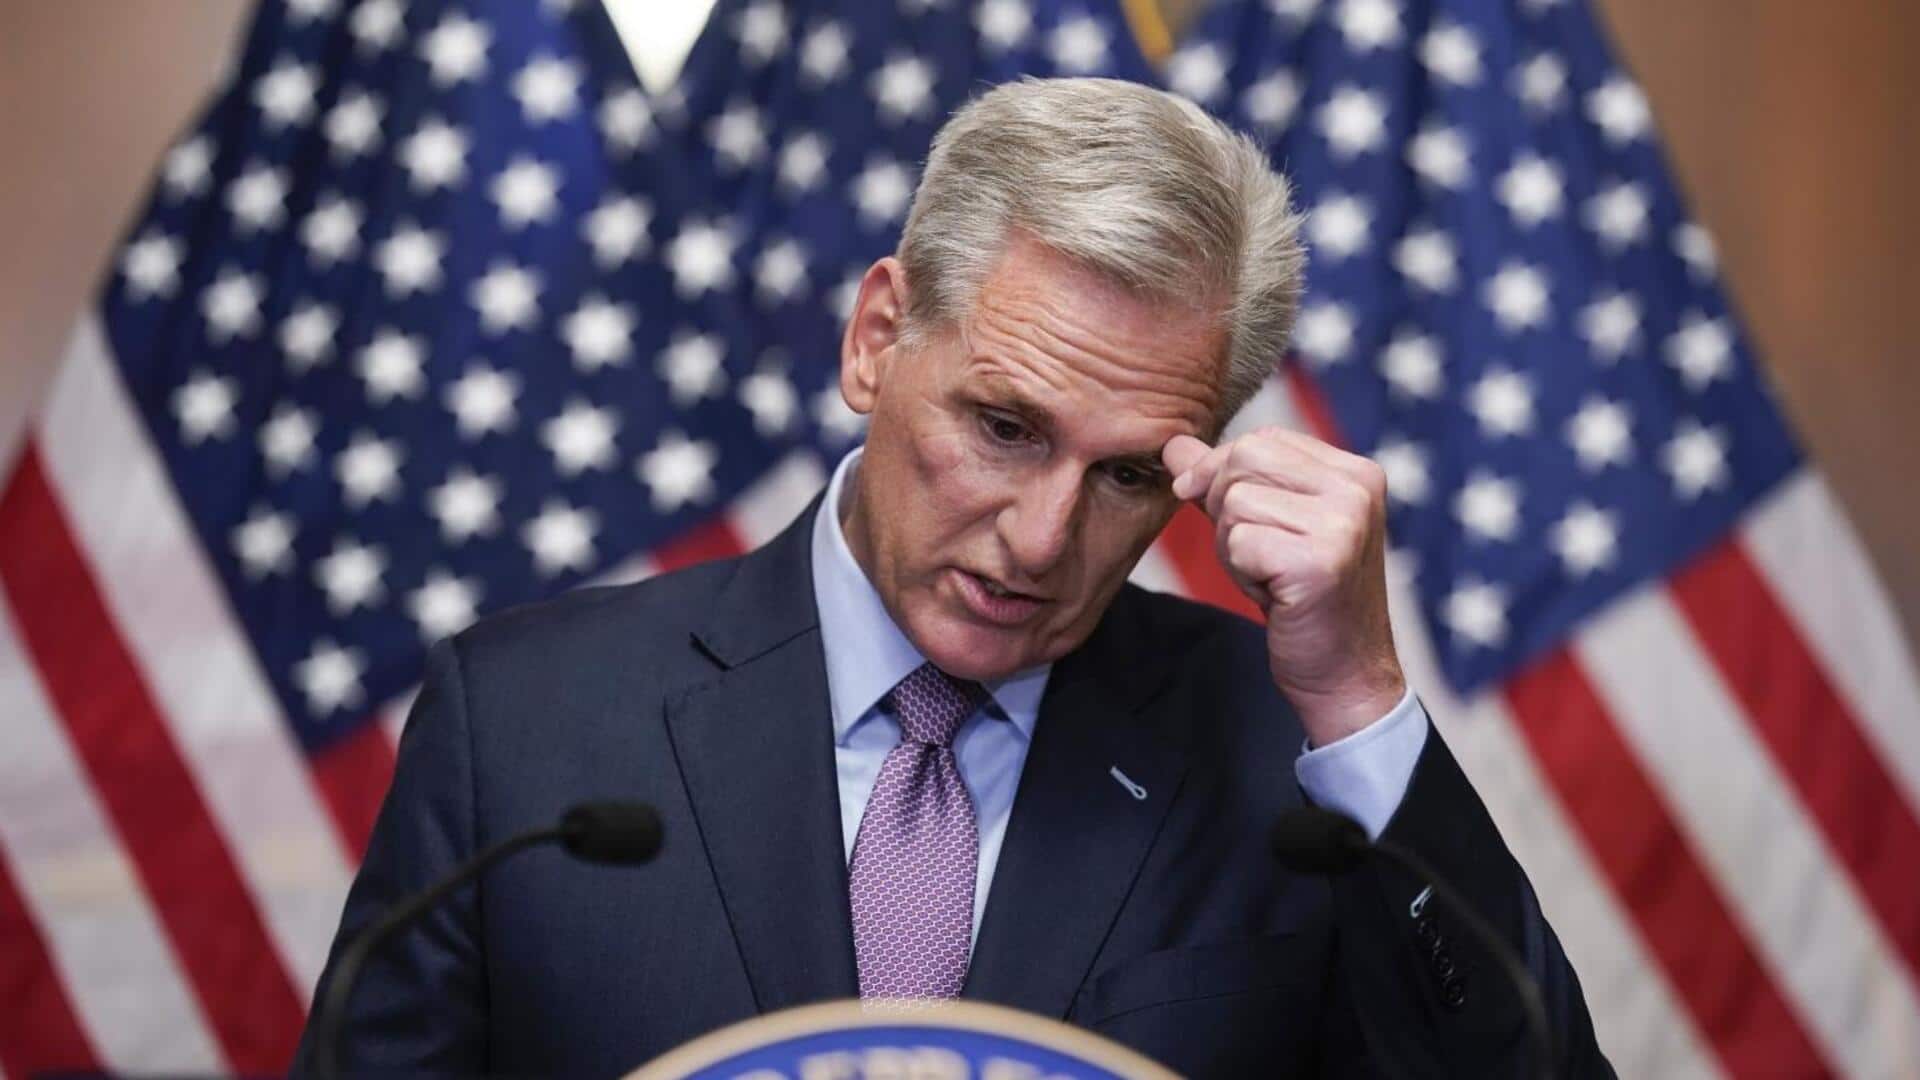 Kevin McCarthy ousted as US House Speaker